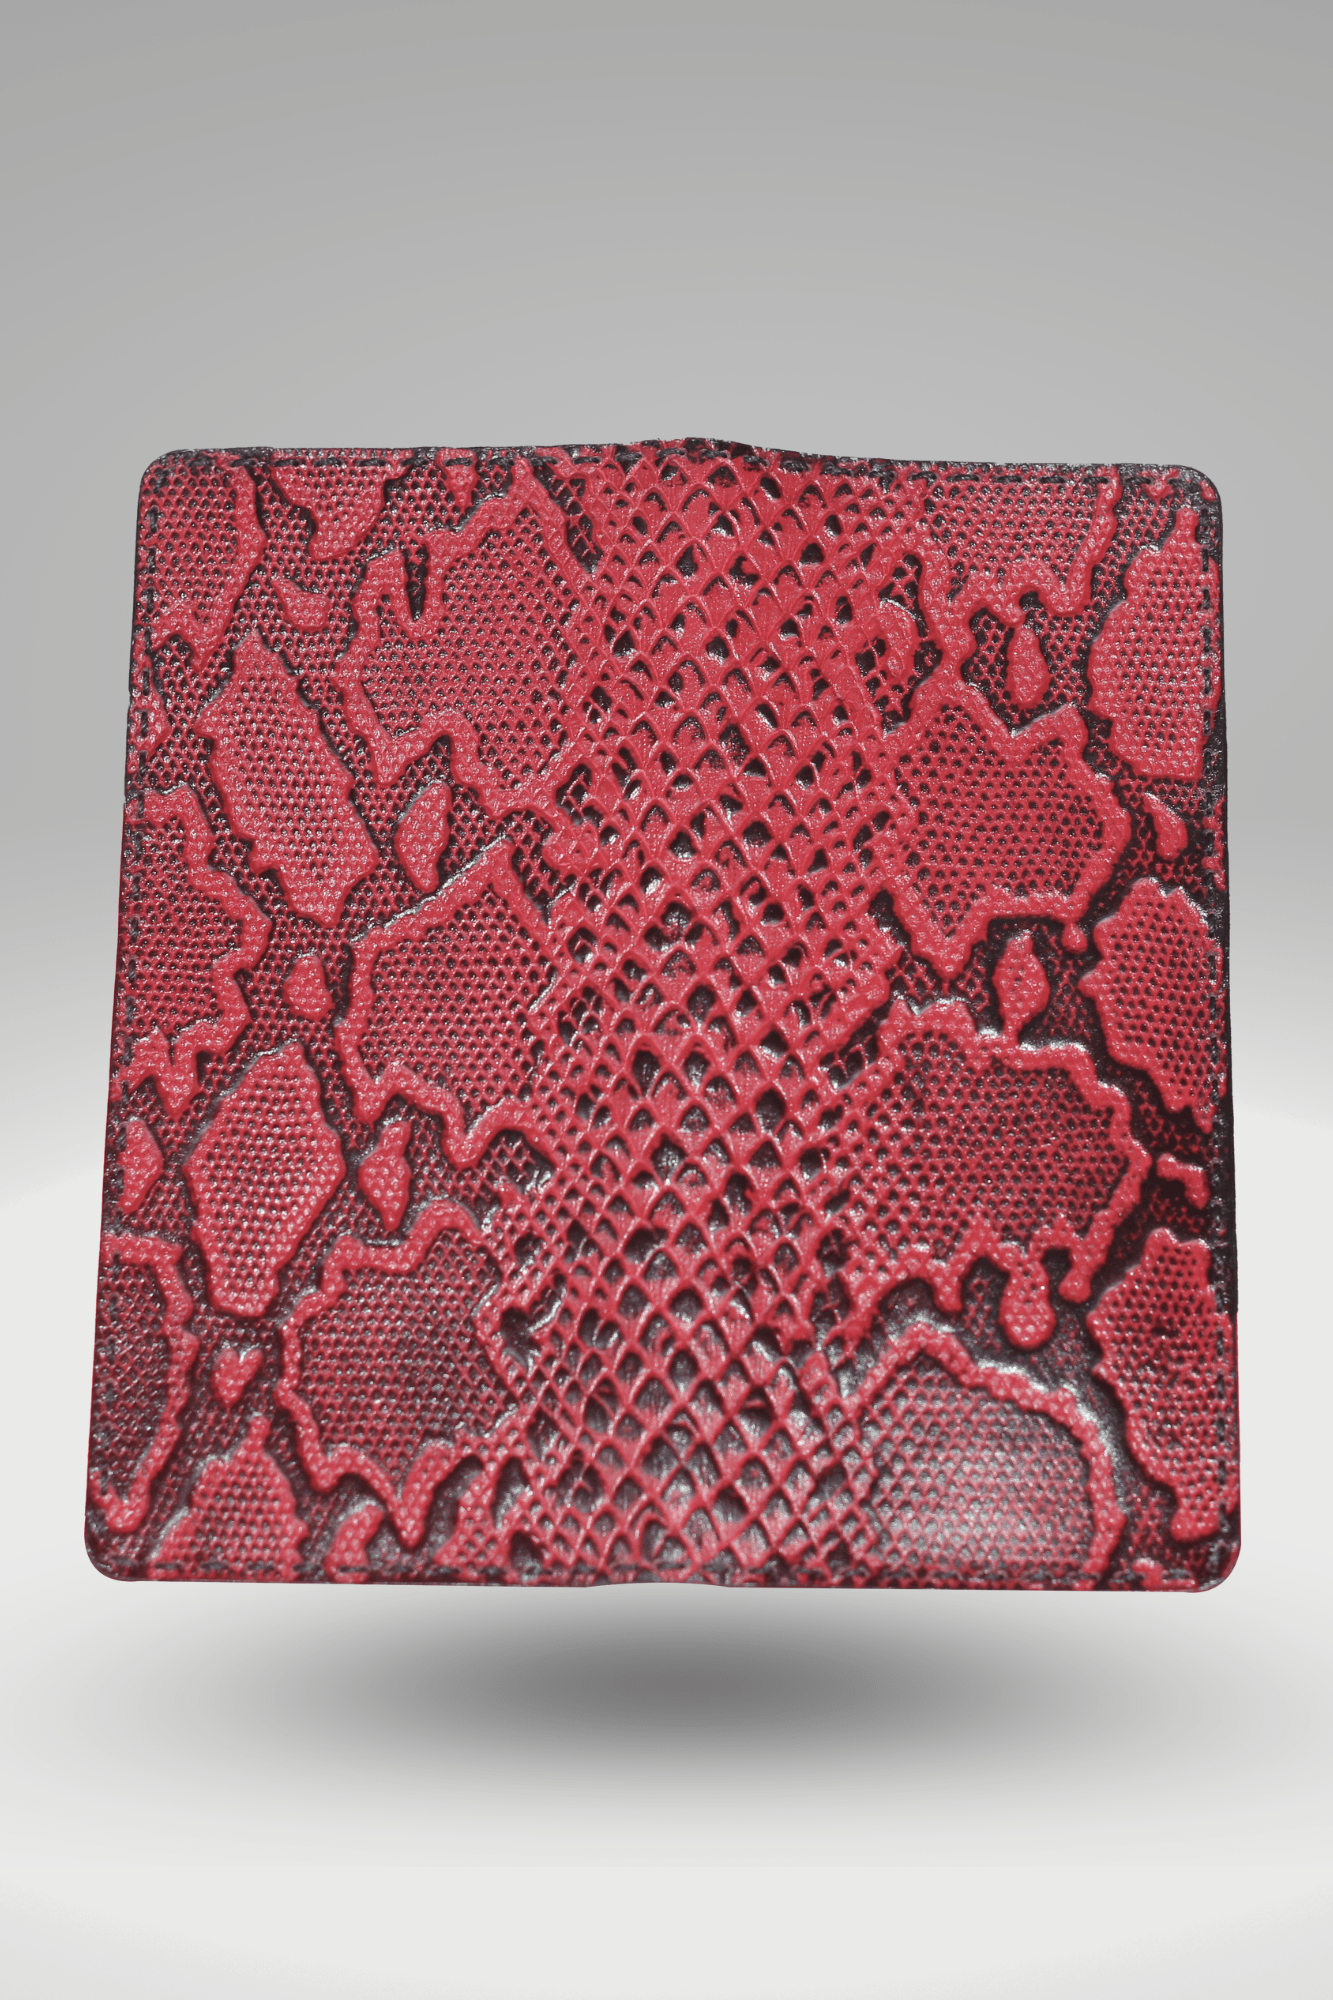 Unisex Genuine Leather Wallet With Black Hand-Tipped Maroon Python Textured Finish | Exotic Bi-fold Leather Long Wallet